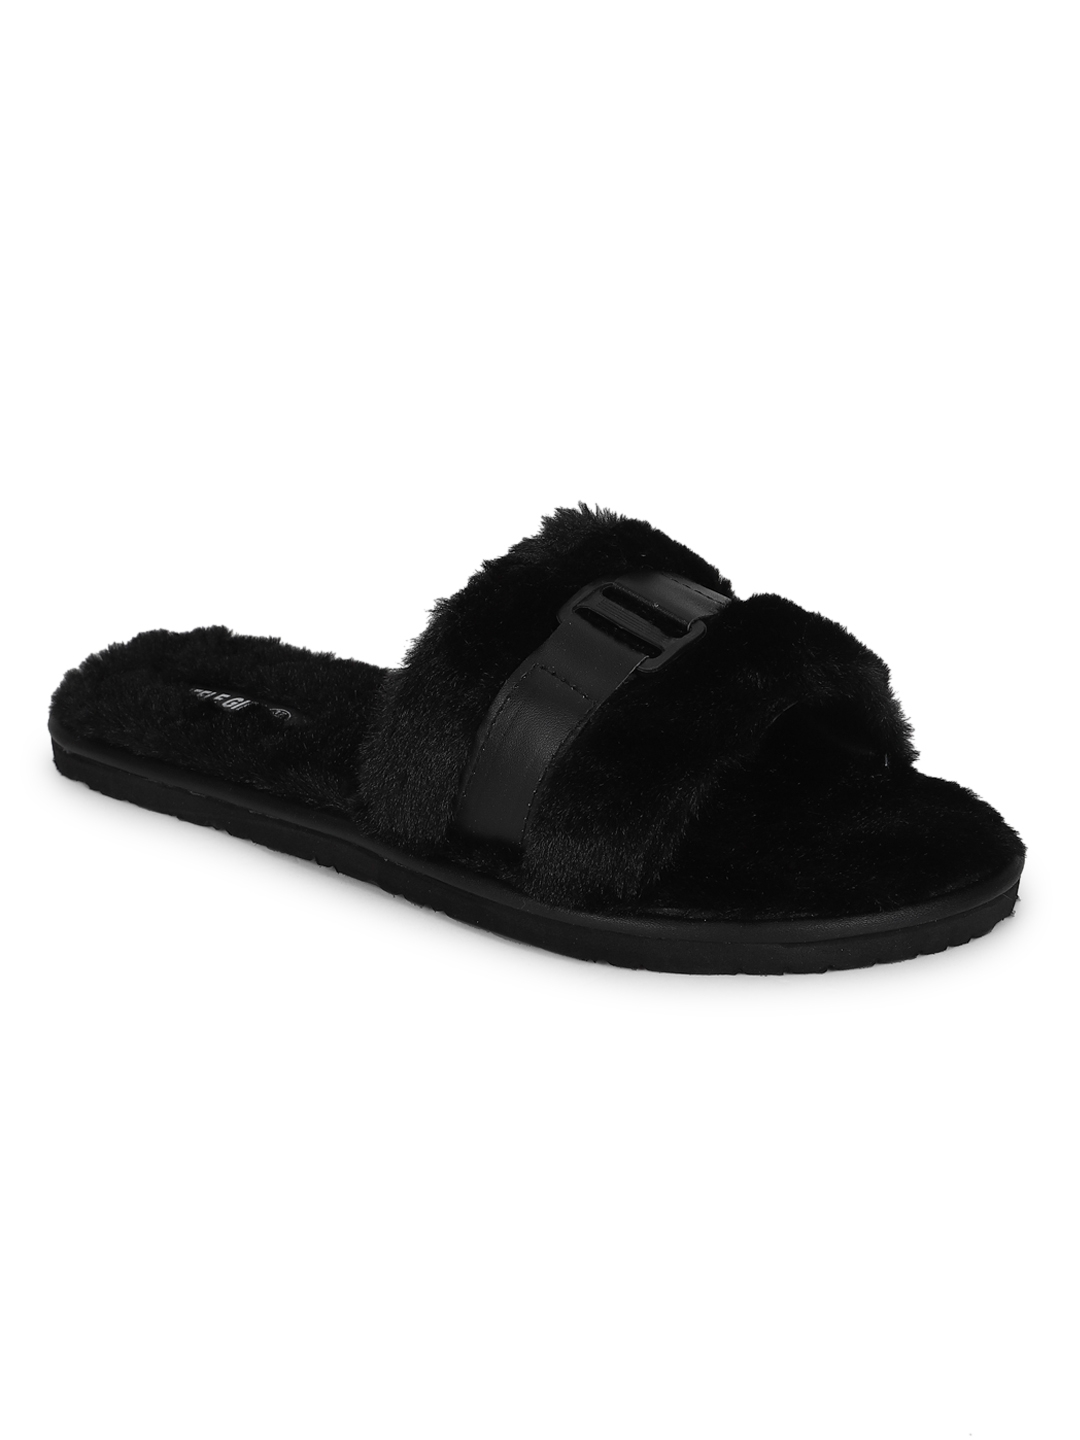 Truffle Collection | Black Fuzzy Fur Slip Ons With Buckle